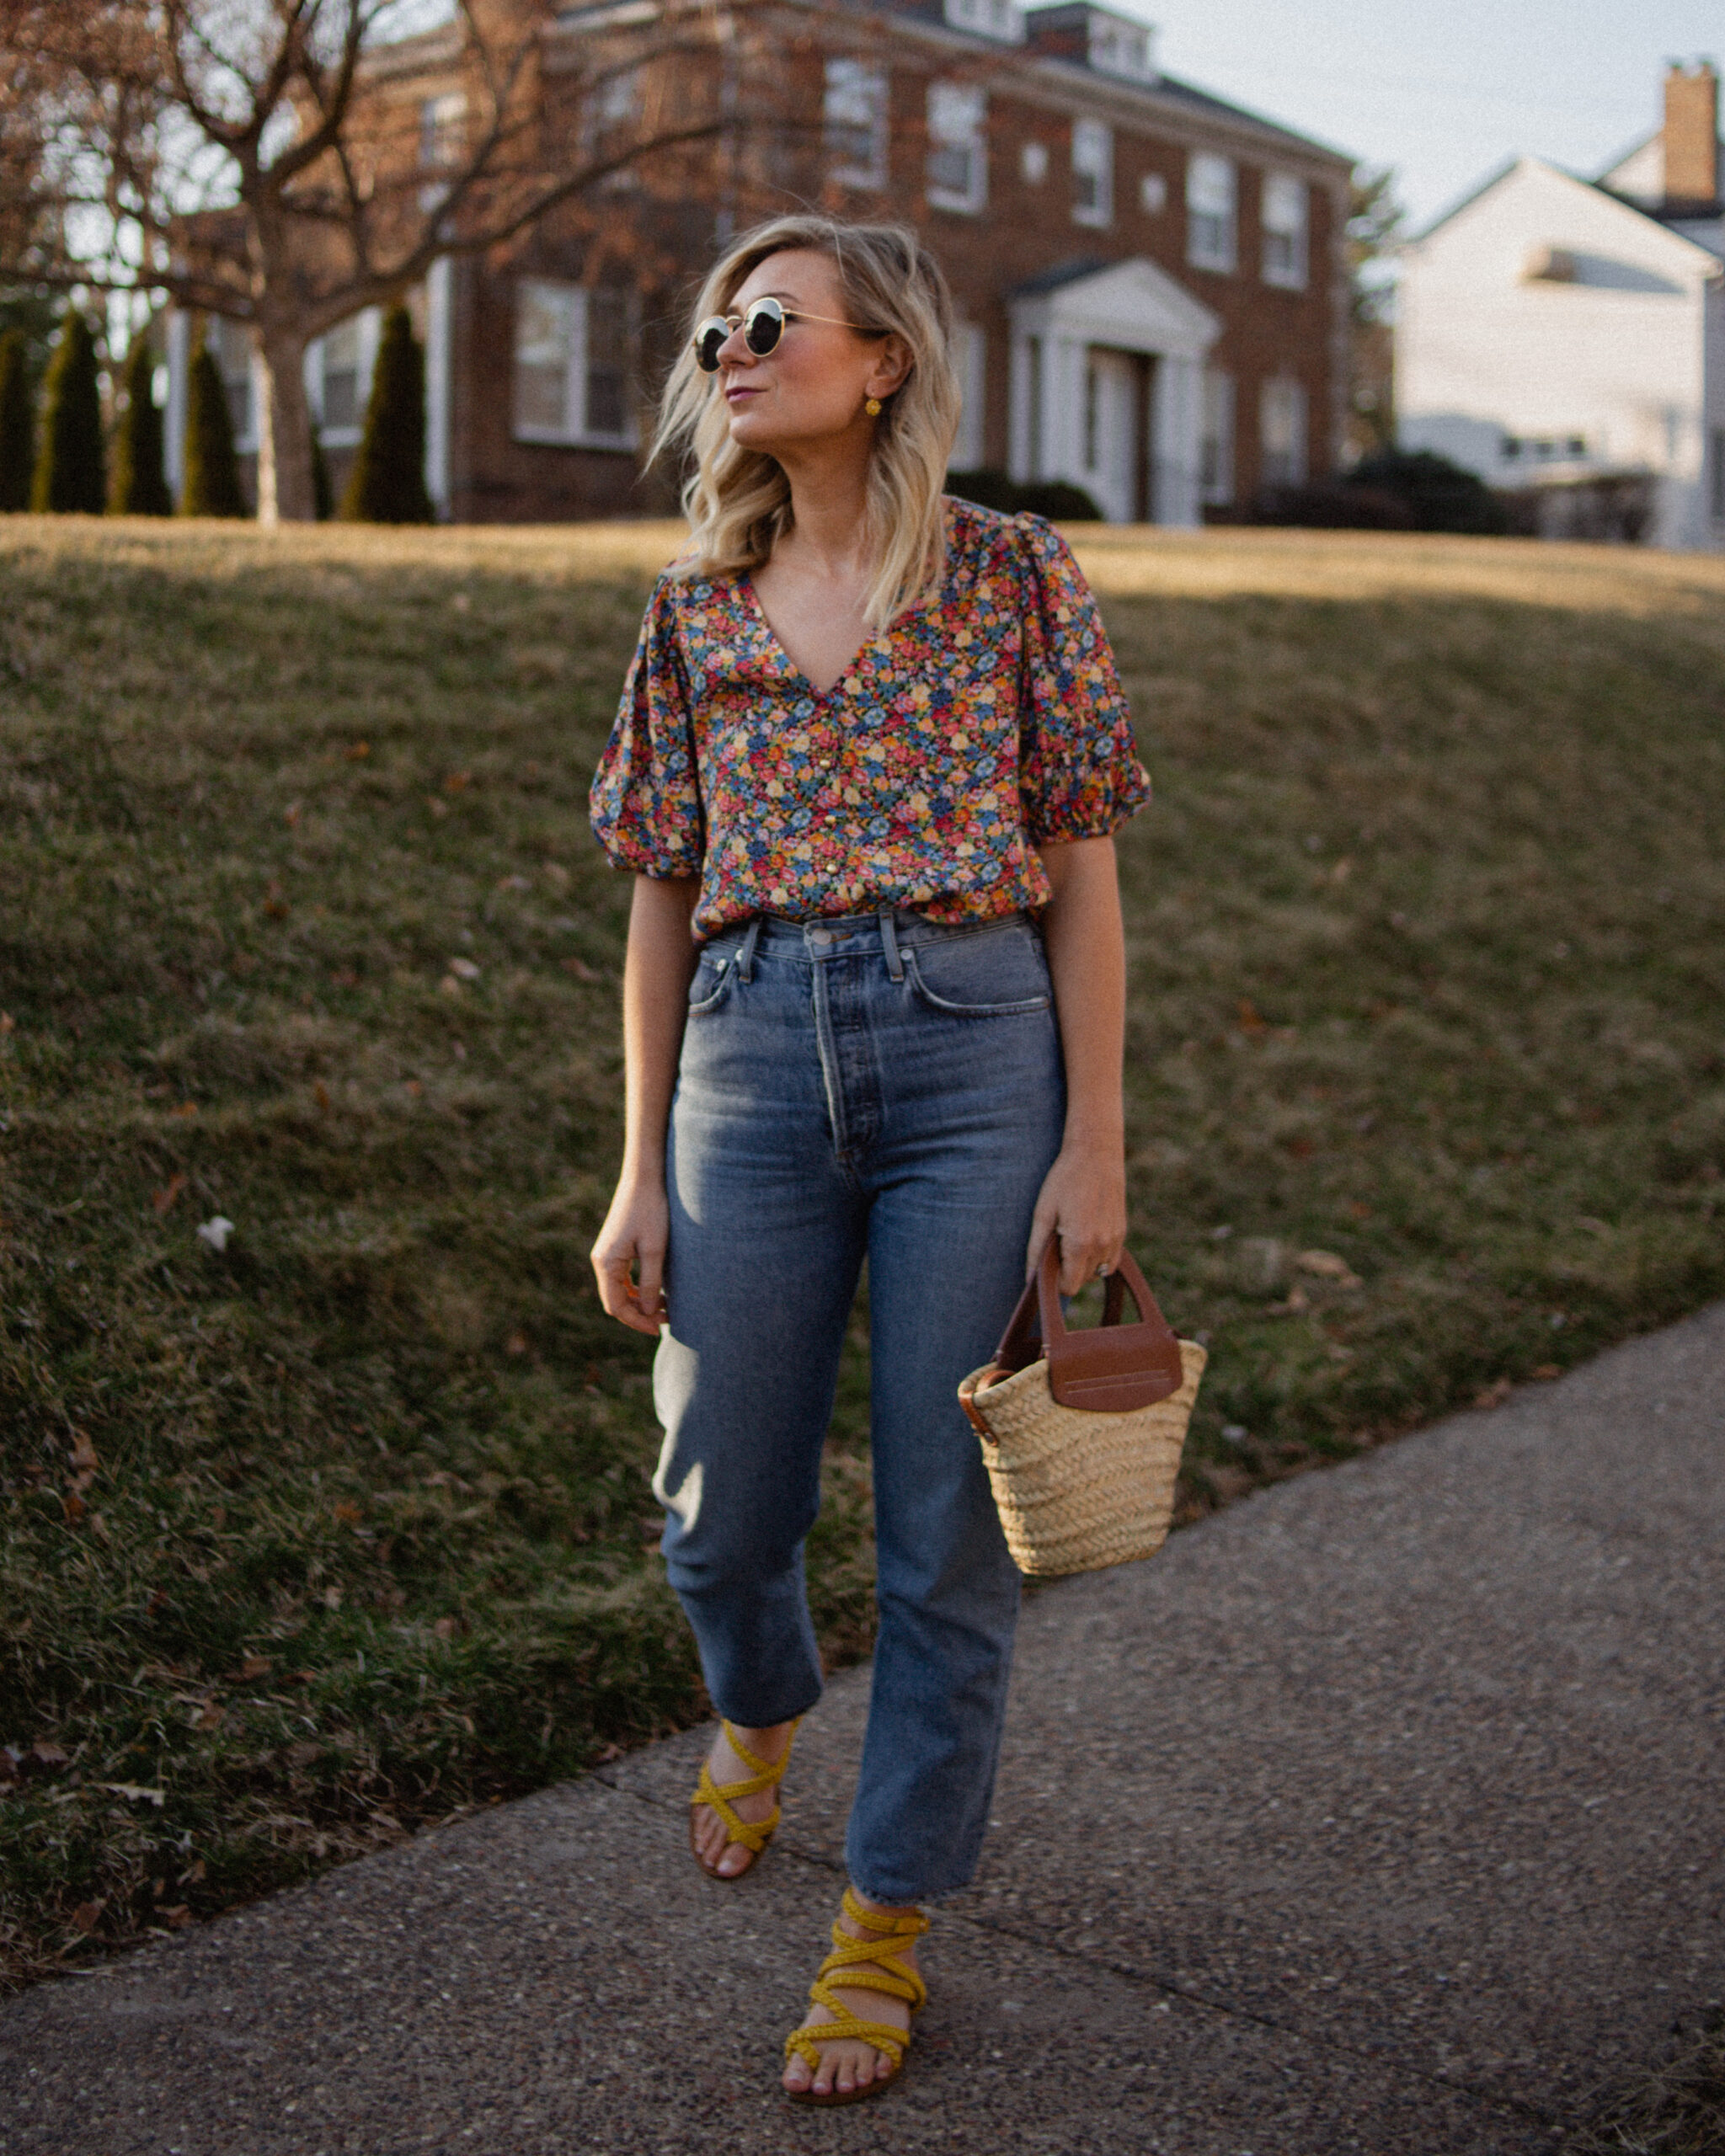 Karin Emily wears a floral top and yellow sandals from Sezane paired with a straight leg pair of jeans from Agolde